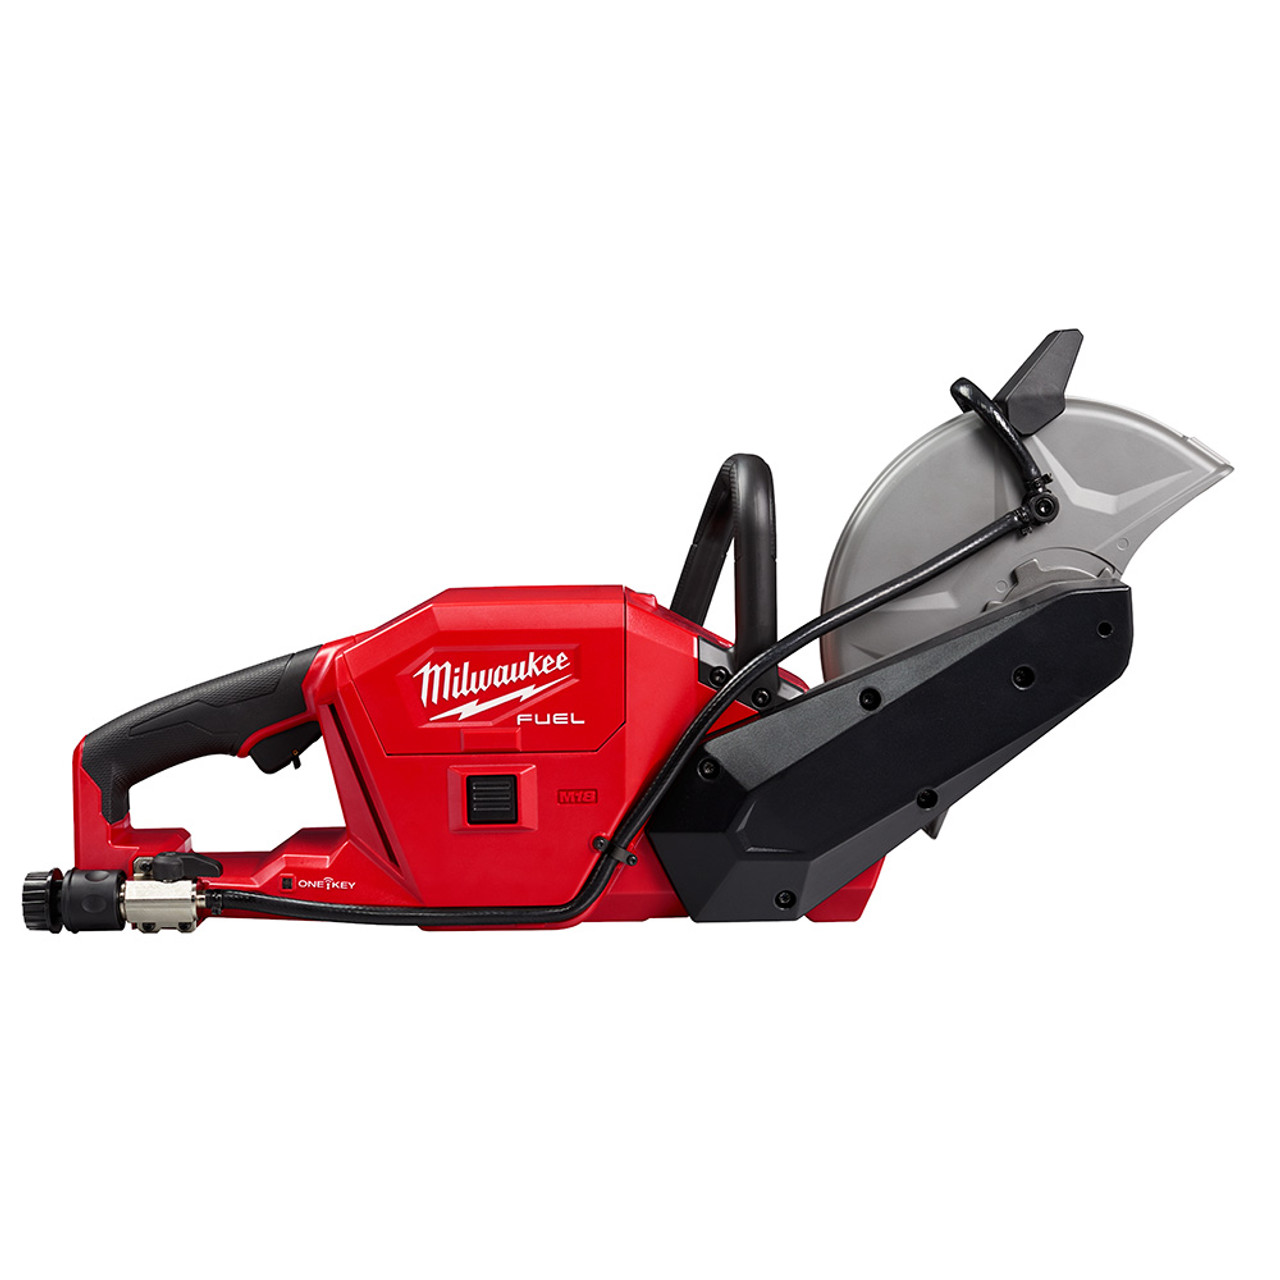 Milwaukee 2786-20 M18 FUEL In. Cut-Off Saw Bare Tool